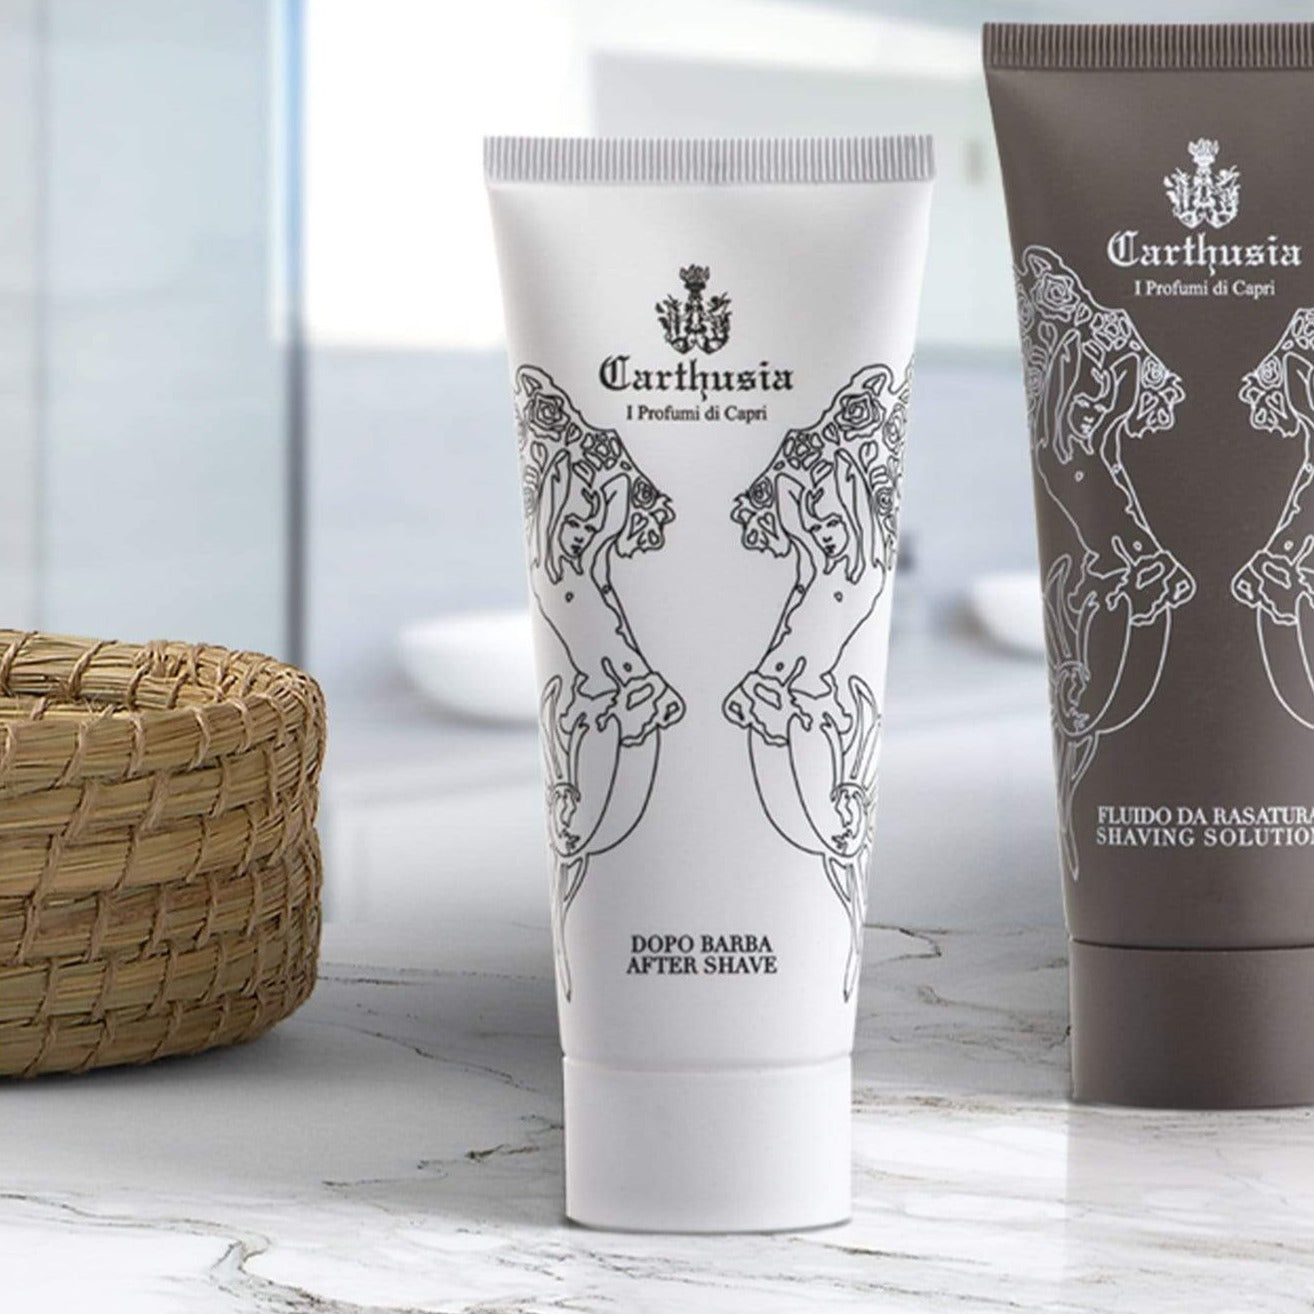 CARTHUSIA Uomo After Shave